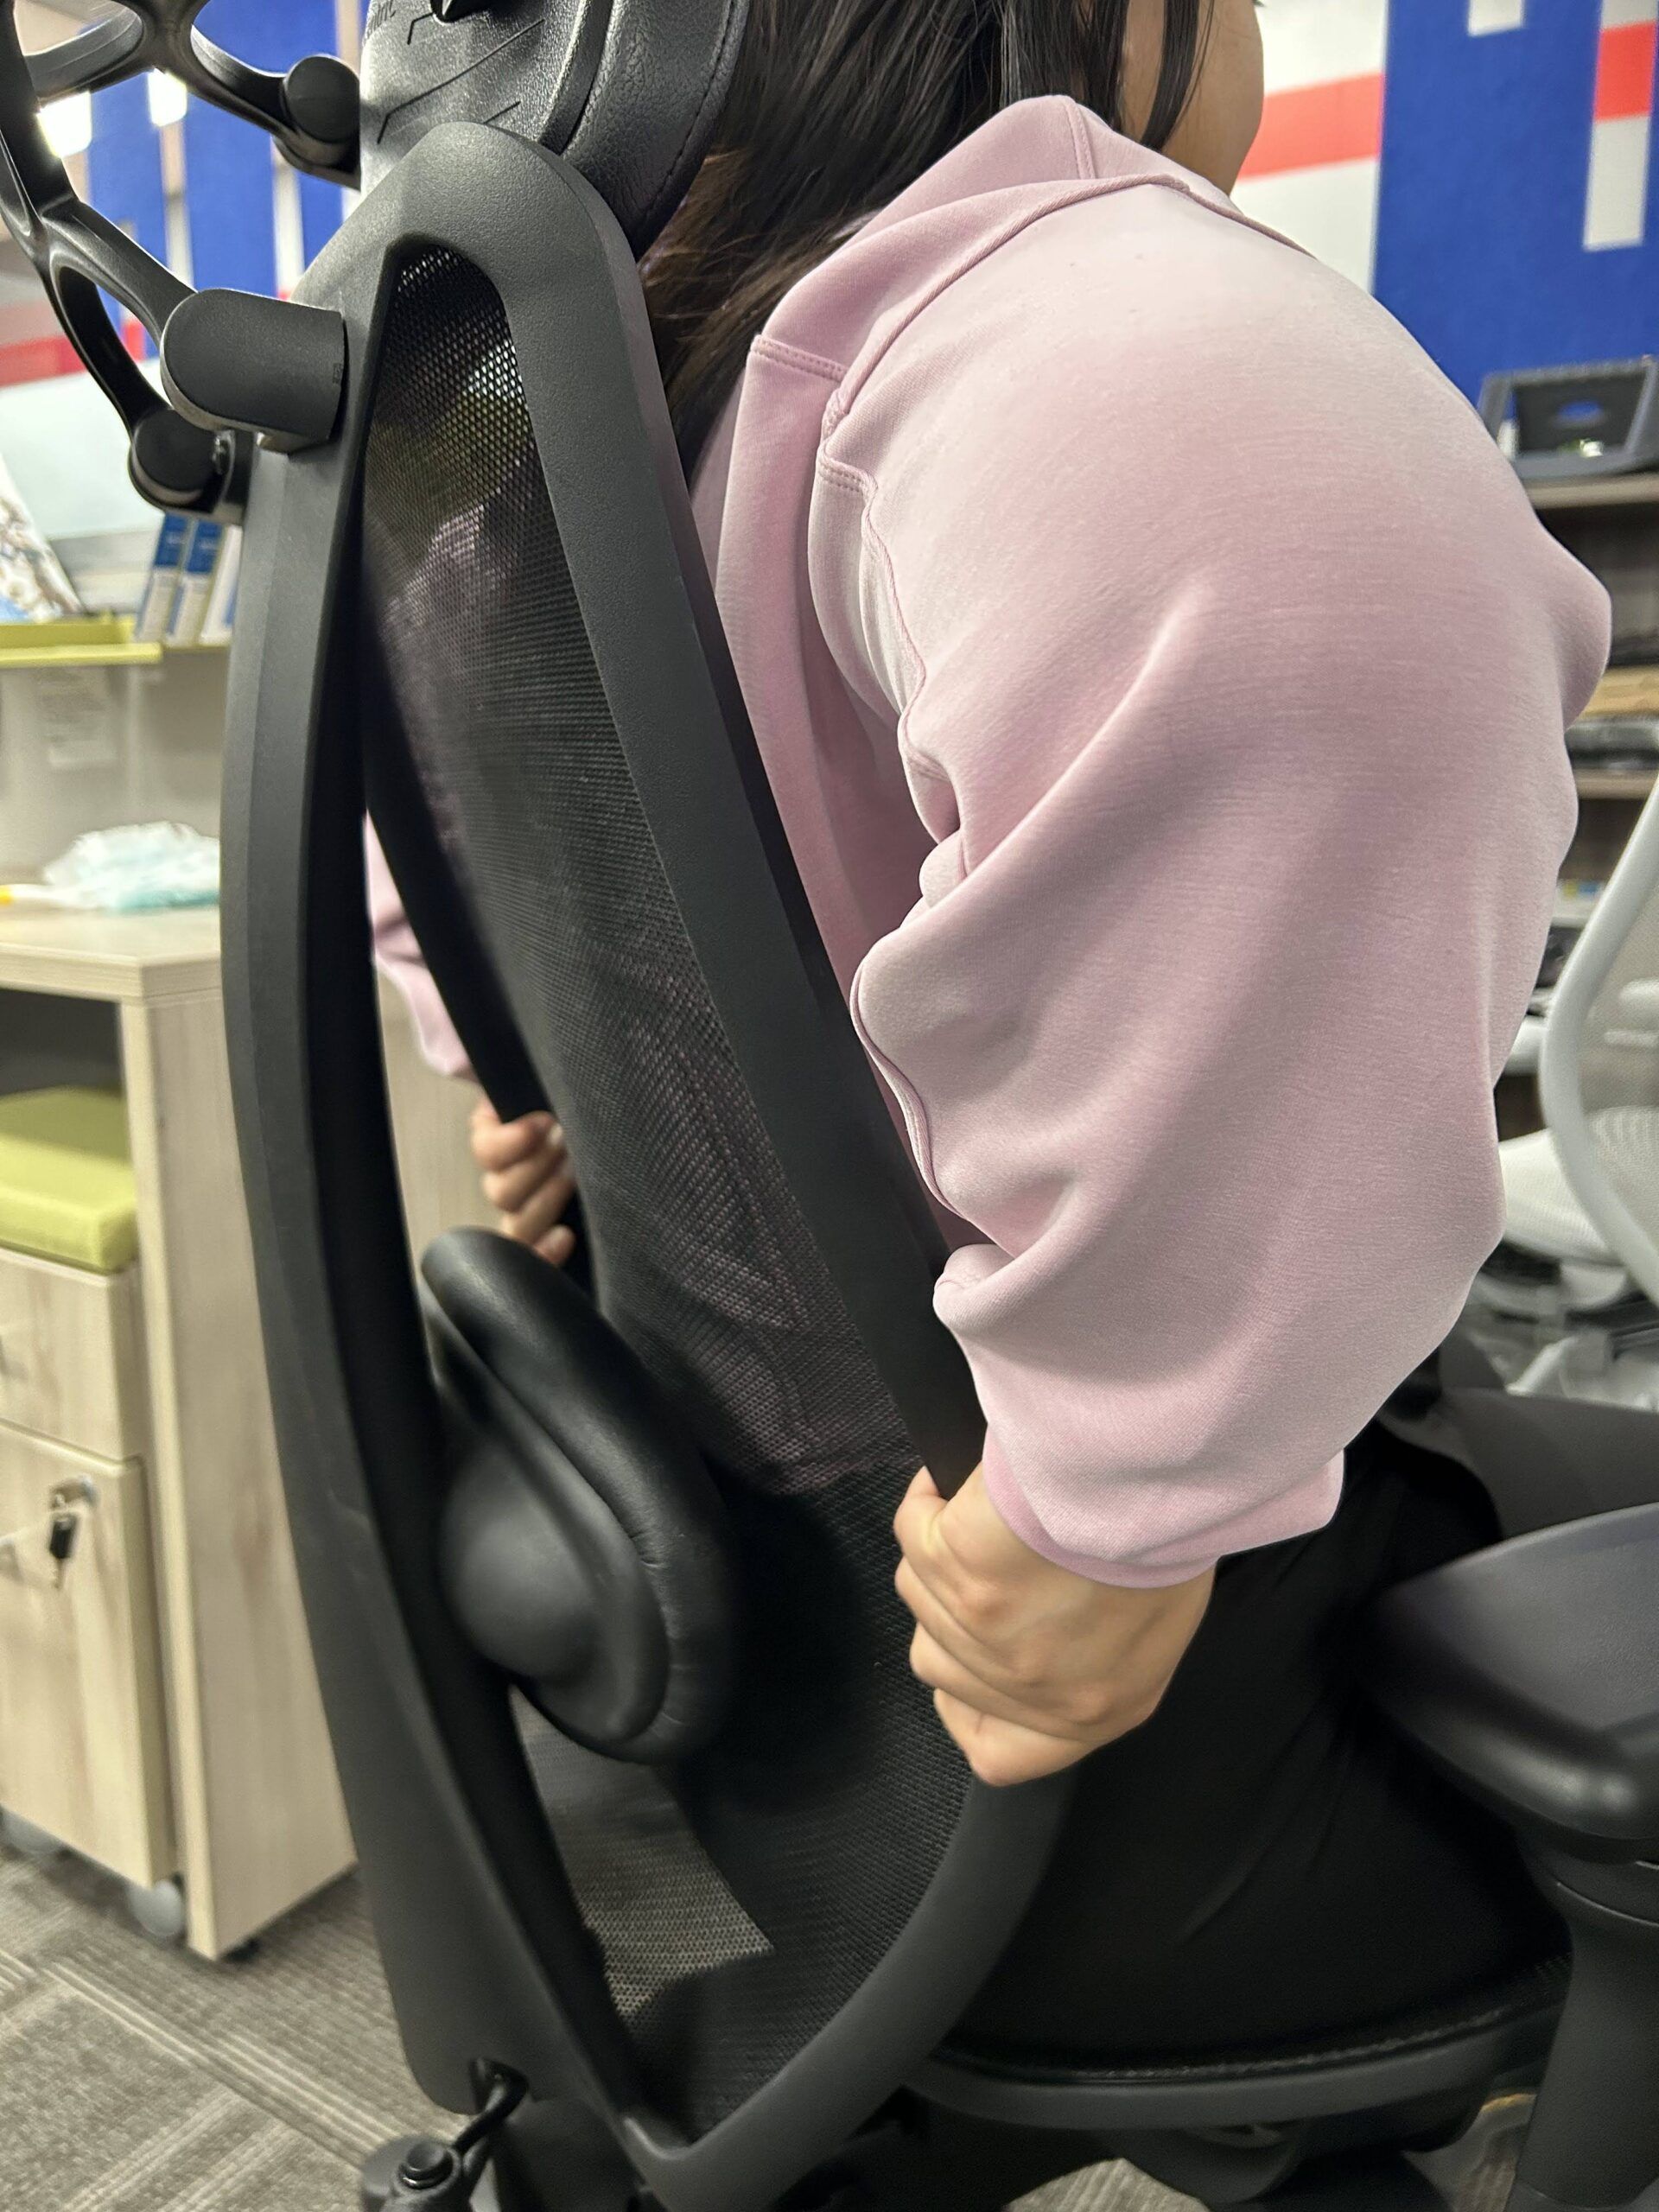 Should Lumbar Support Be Positioned on Your Higher or Lower Back?